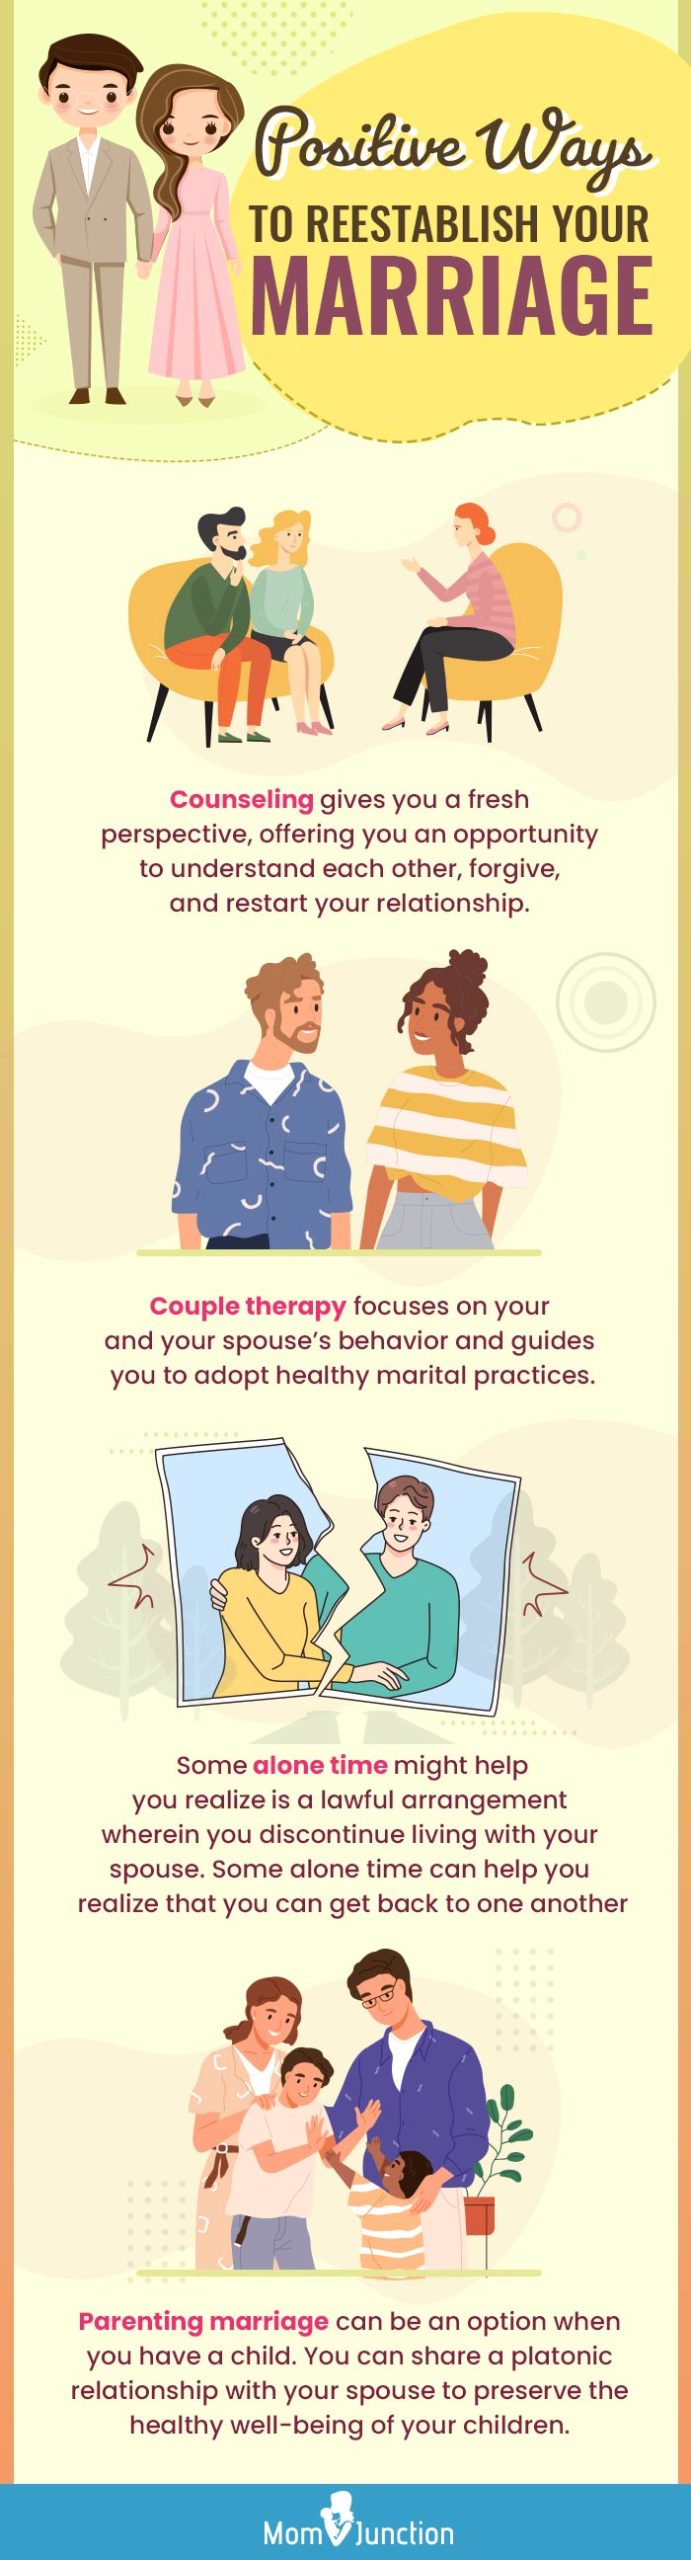 positive ways to reestablish your marriage [infographic]